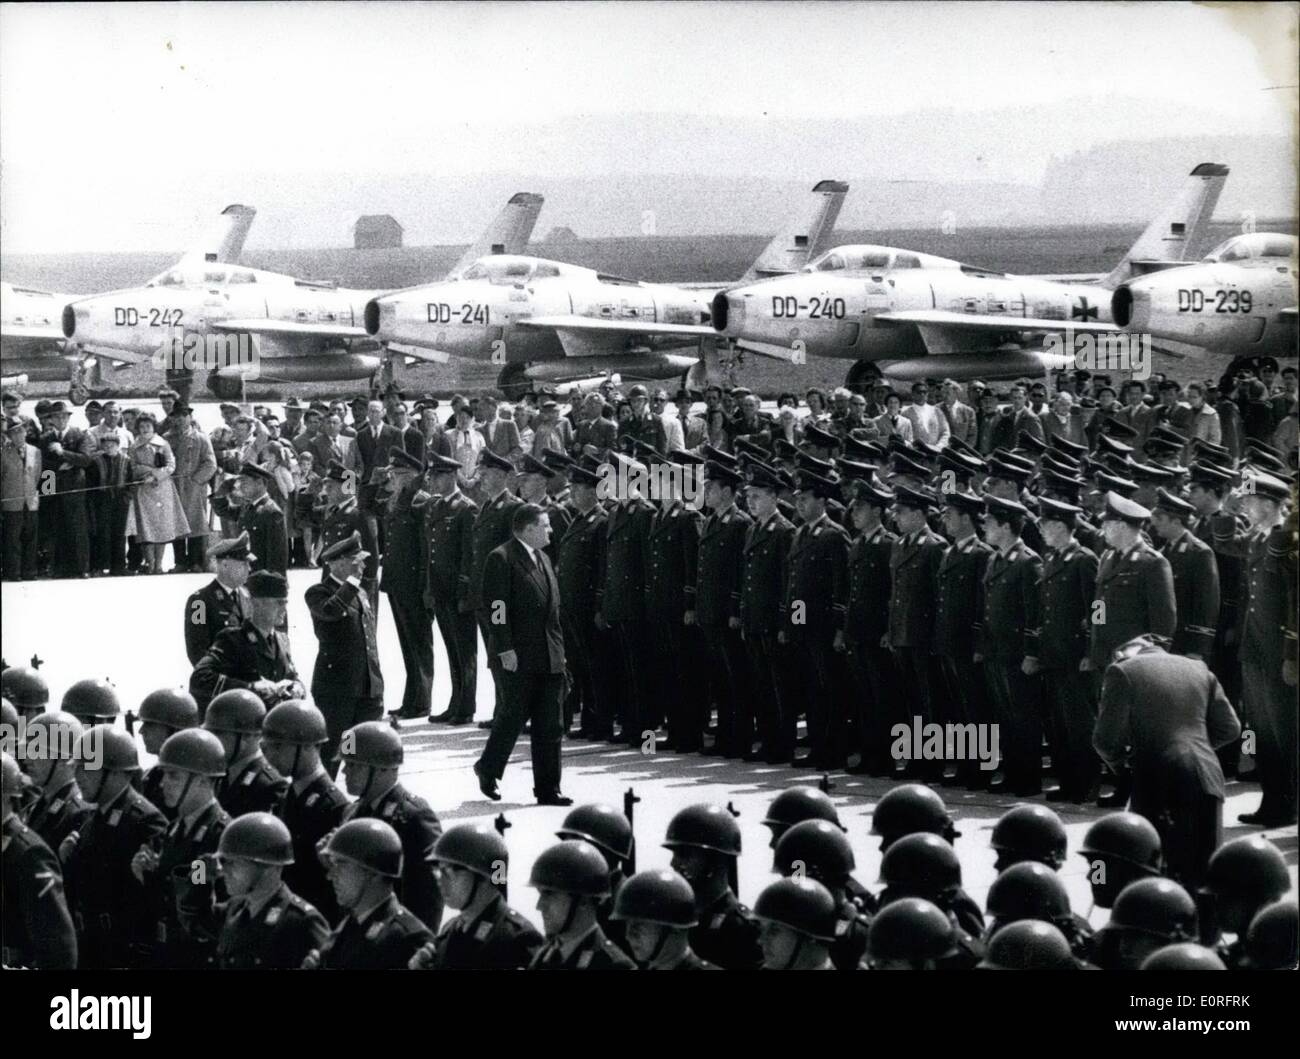 May 05, 1959 - Bomber Squadron on 34 ready: On May 5th Minister of Defence Strauss inaugurated the 34th bomber squadron in front of the soldiers of the air-force and numerous on-lookers and in the presence of Vice-President of the Bundestag Richard Jaegar (Jaegar), th inspector of the air-force lieutenant-general Kammhuber (Kammhuber), the representative of the US Air-force General Newberry (Newberry) and a number of other personalities Stock Photo